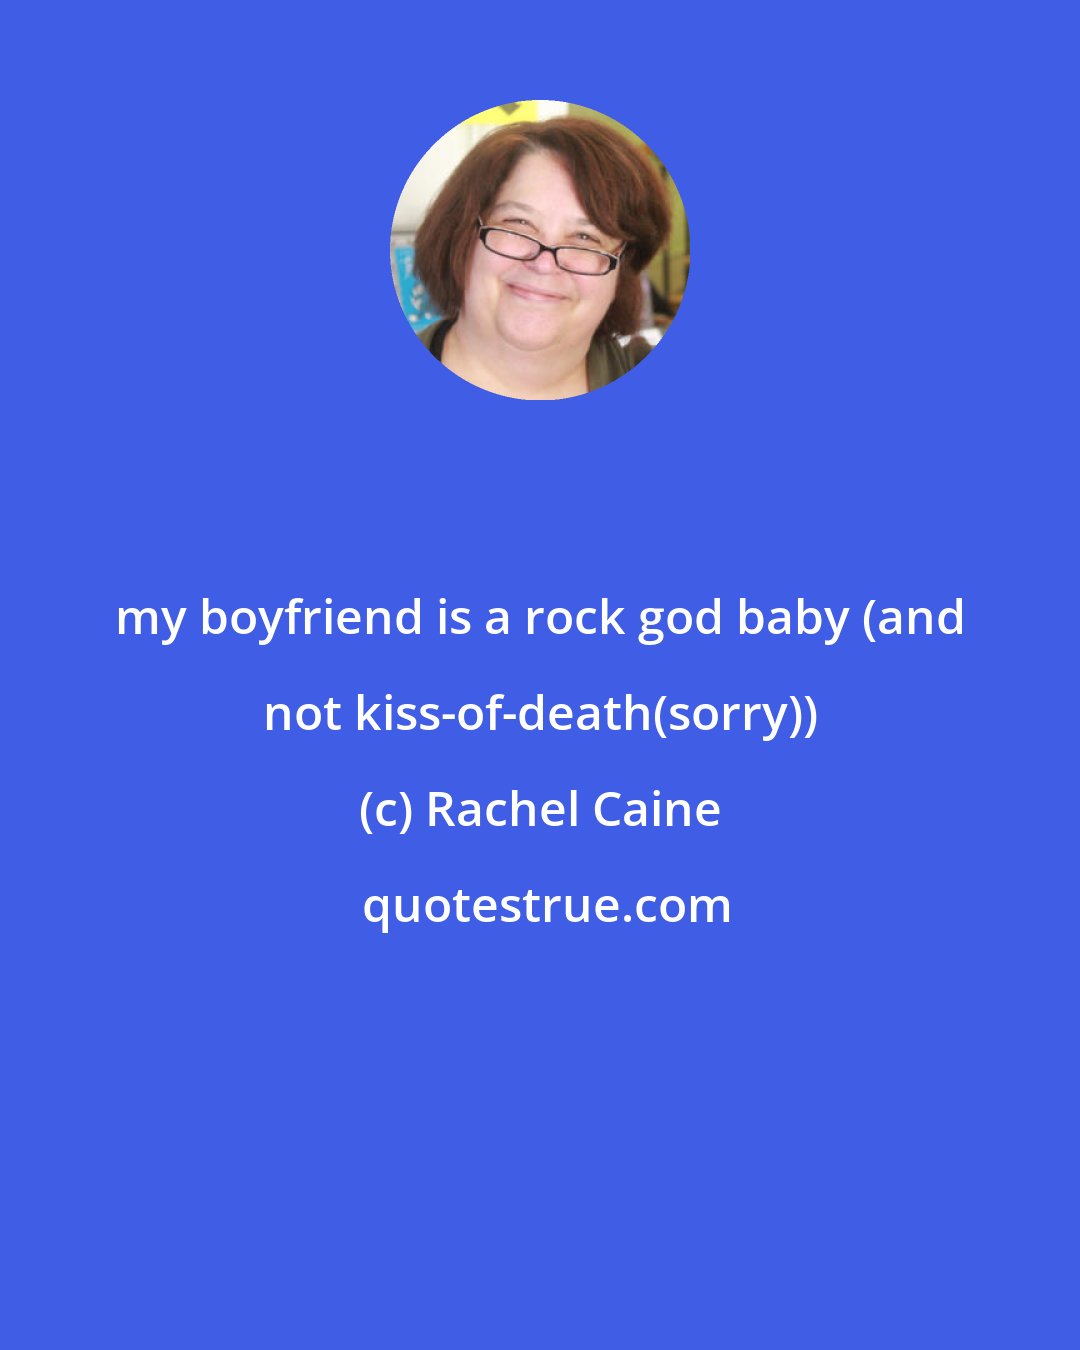 Rachel Caine: my boyfriend is a rock god baby (and not kiss-of-death(sorry))